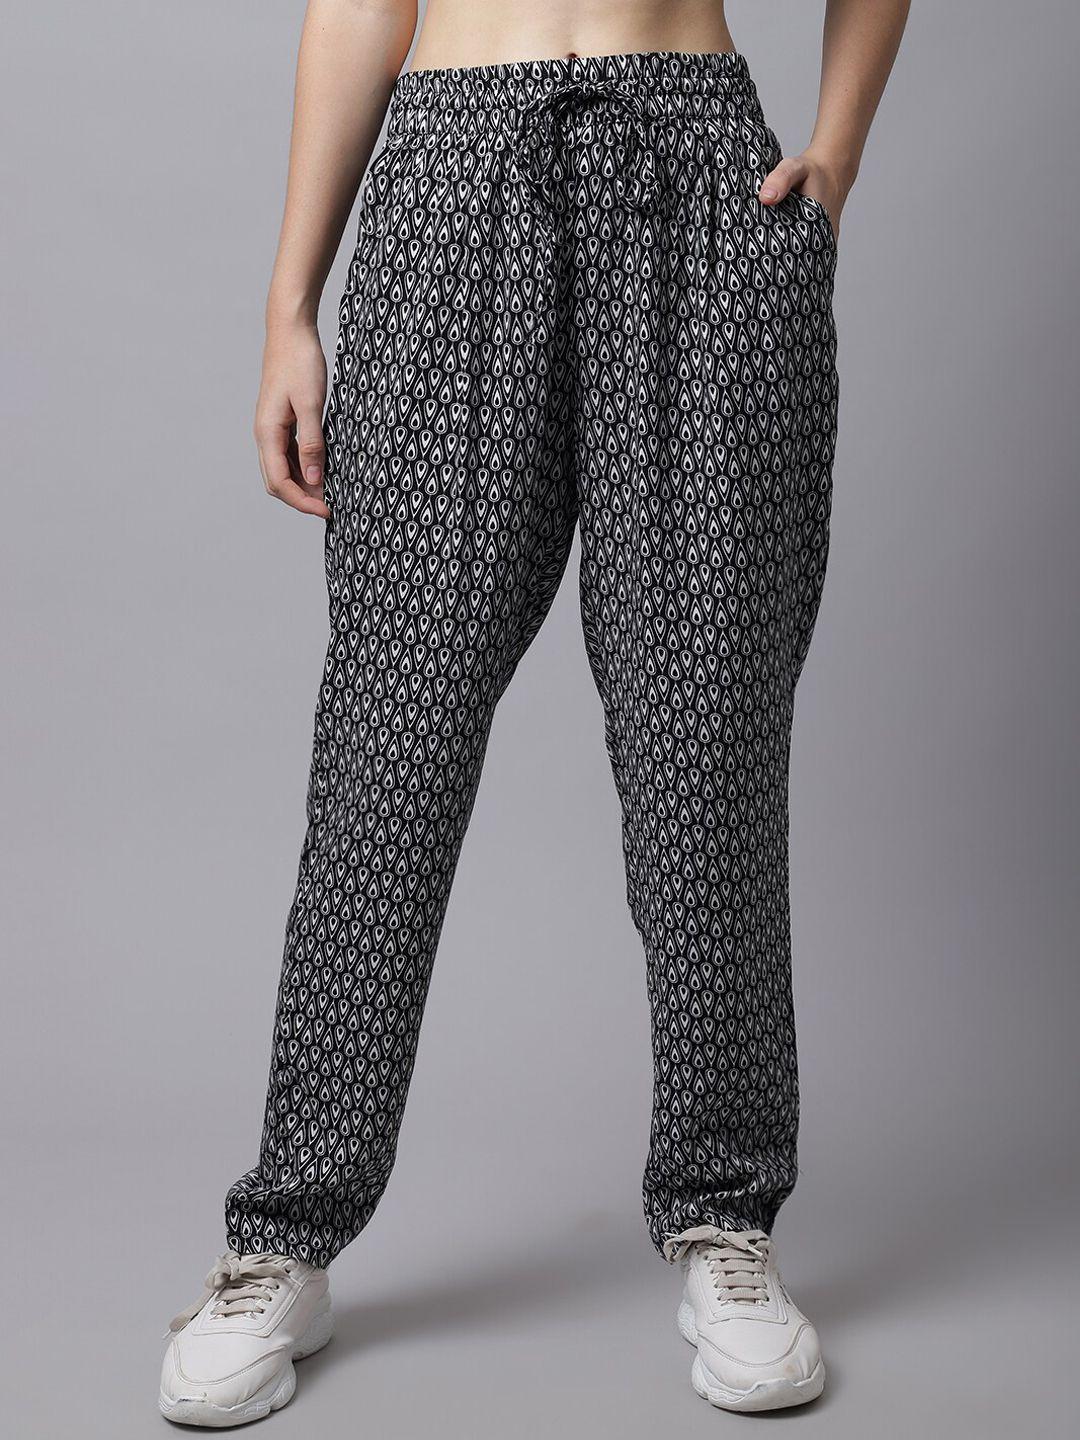 door74 women printed relaxed fit joggers